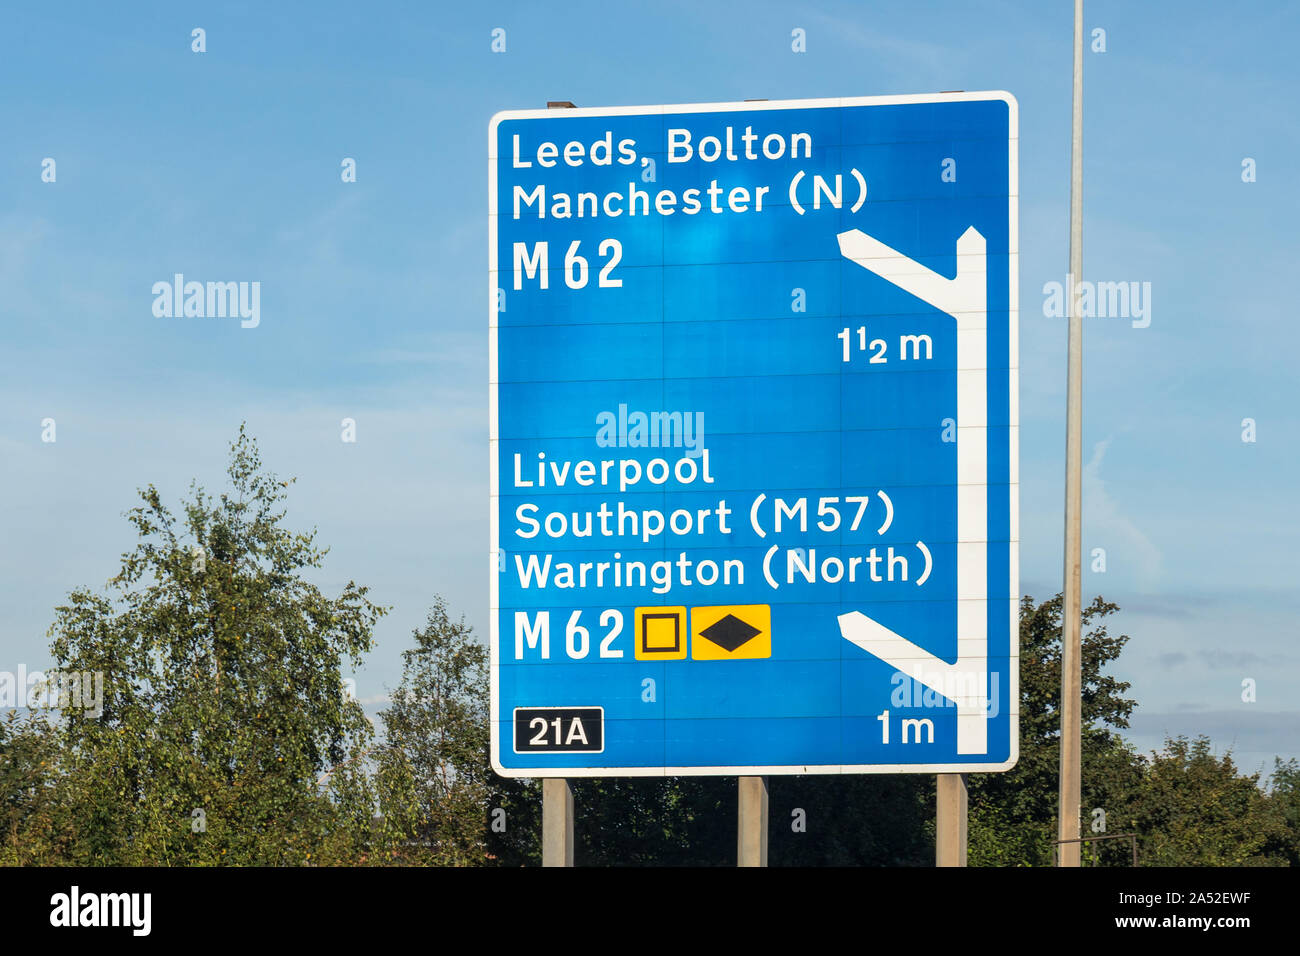 UK motorway sign showing directions to M62 Liverpool, Warrington, Southport (M57) and M 62 Leeds, Bolton, Manchester, UK Stock Photo